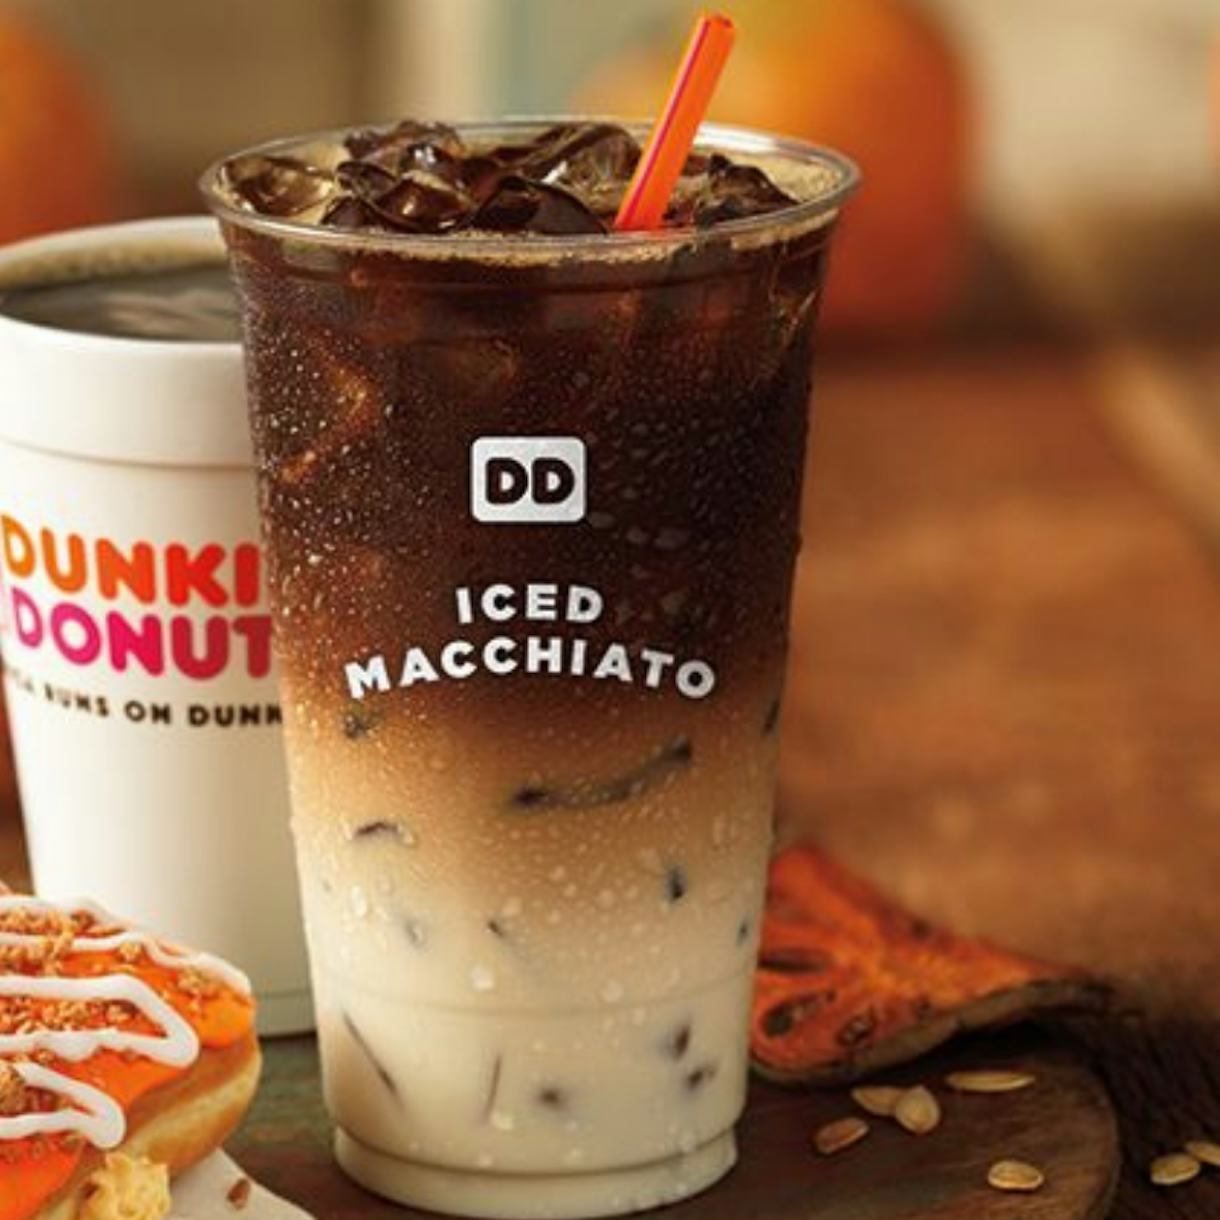 4 Of The Strongest Dunkin' Donuts Fall Drinks, Ranked To Help Perk You Up